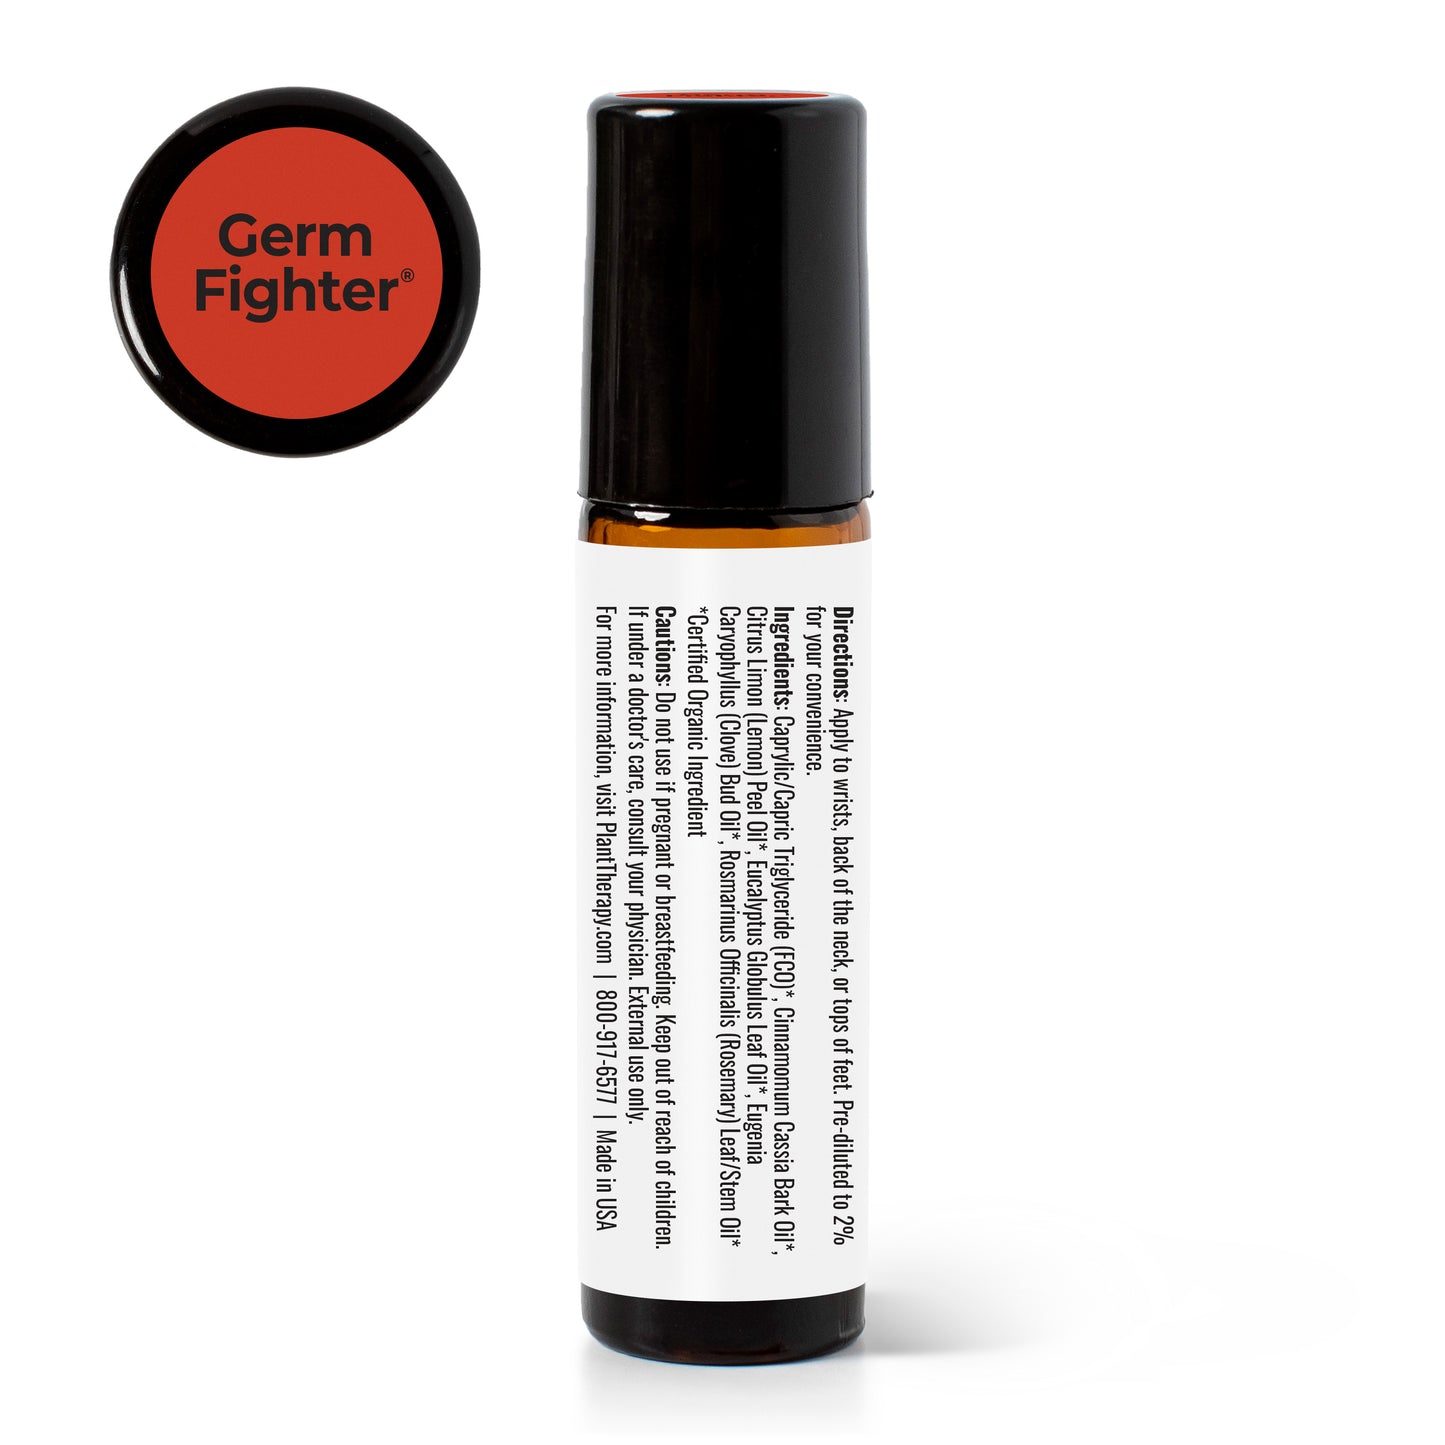 Germ Fighter Essential Oil Blend Pre-Diluted Roll-On back label